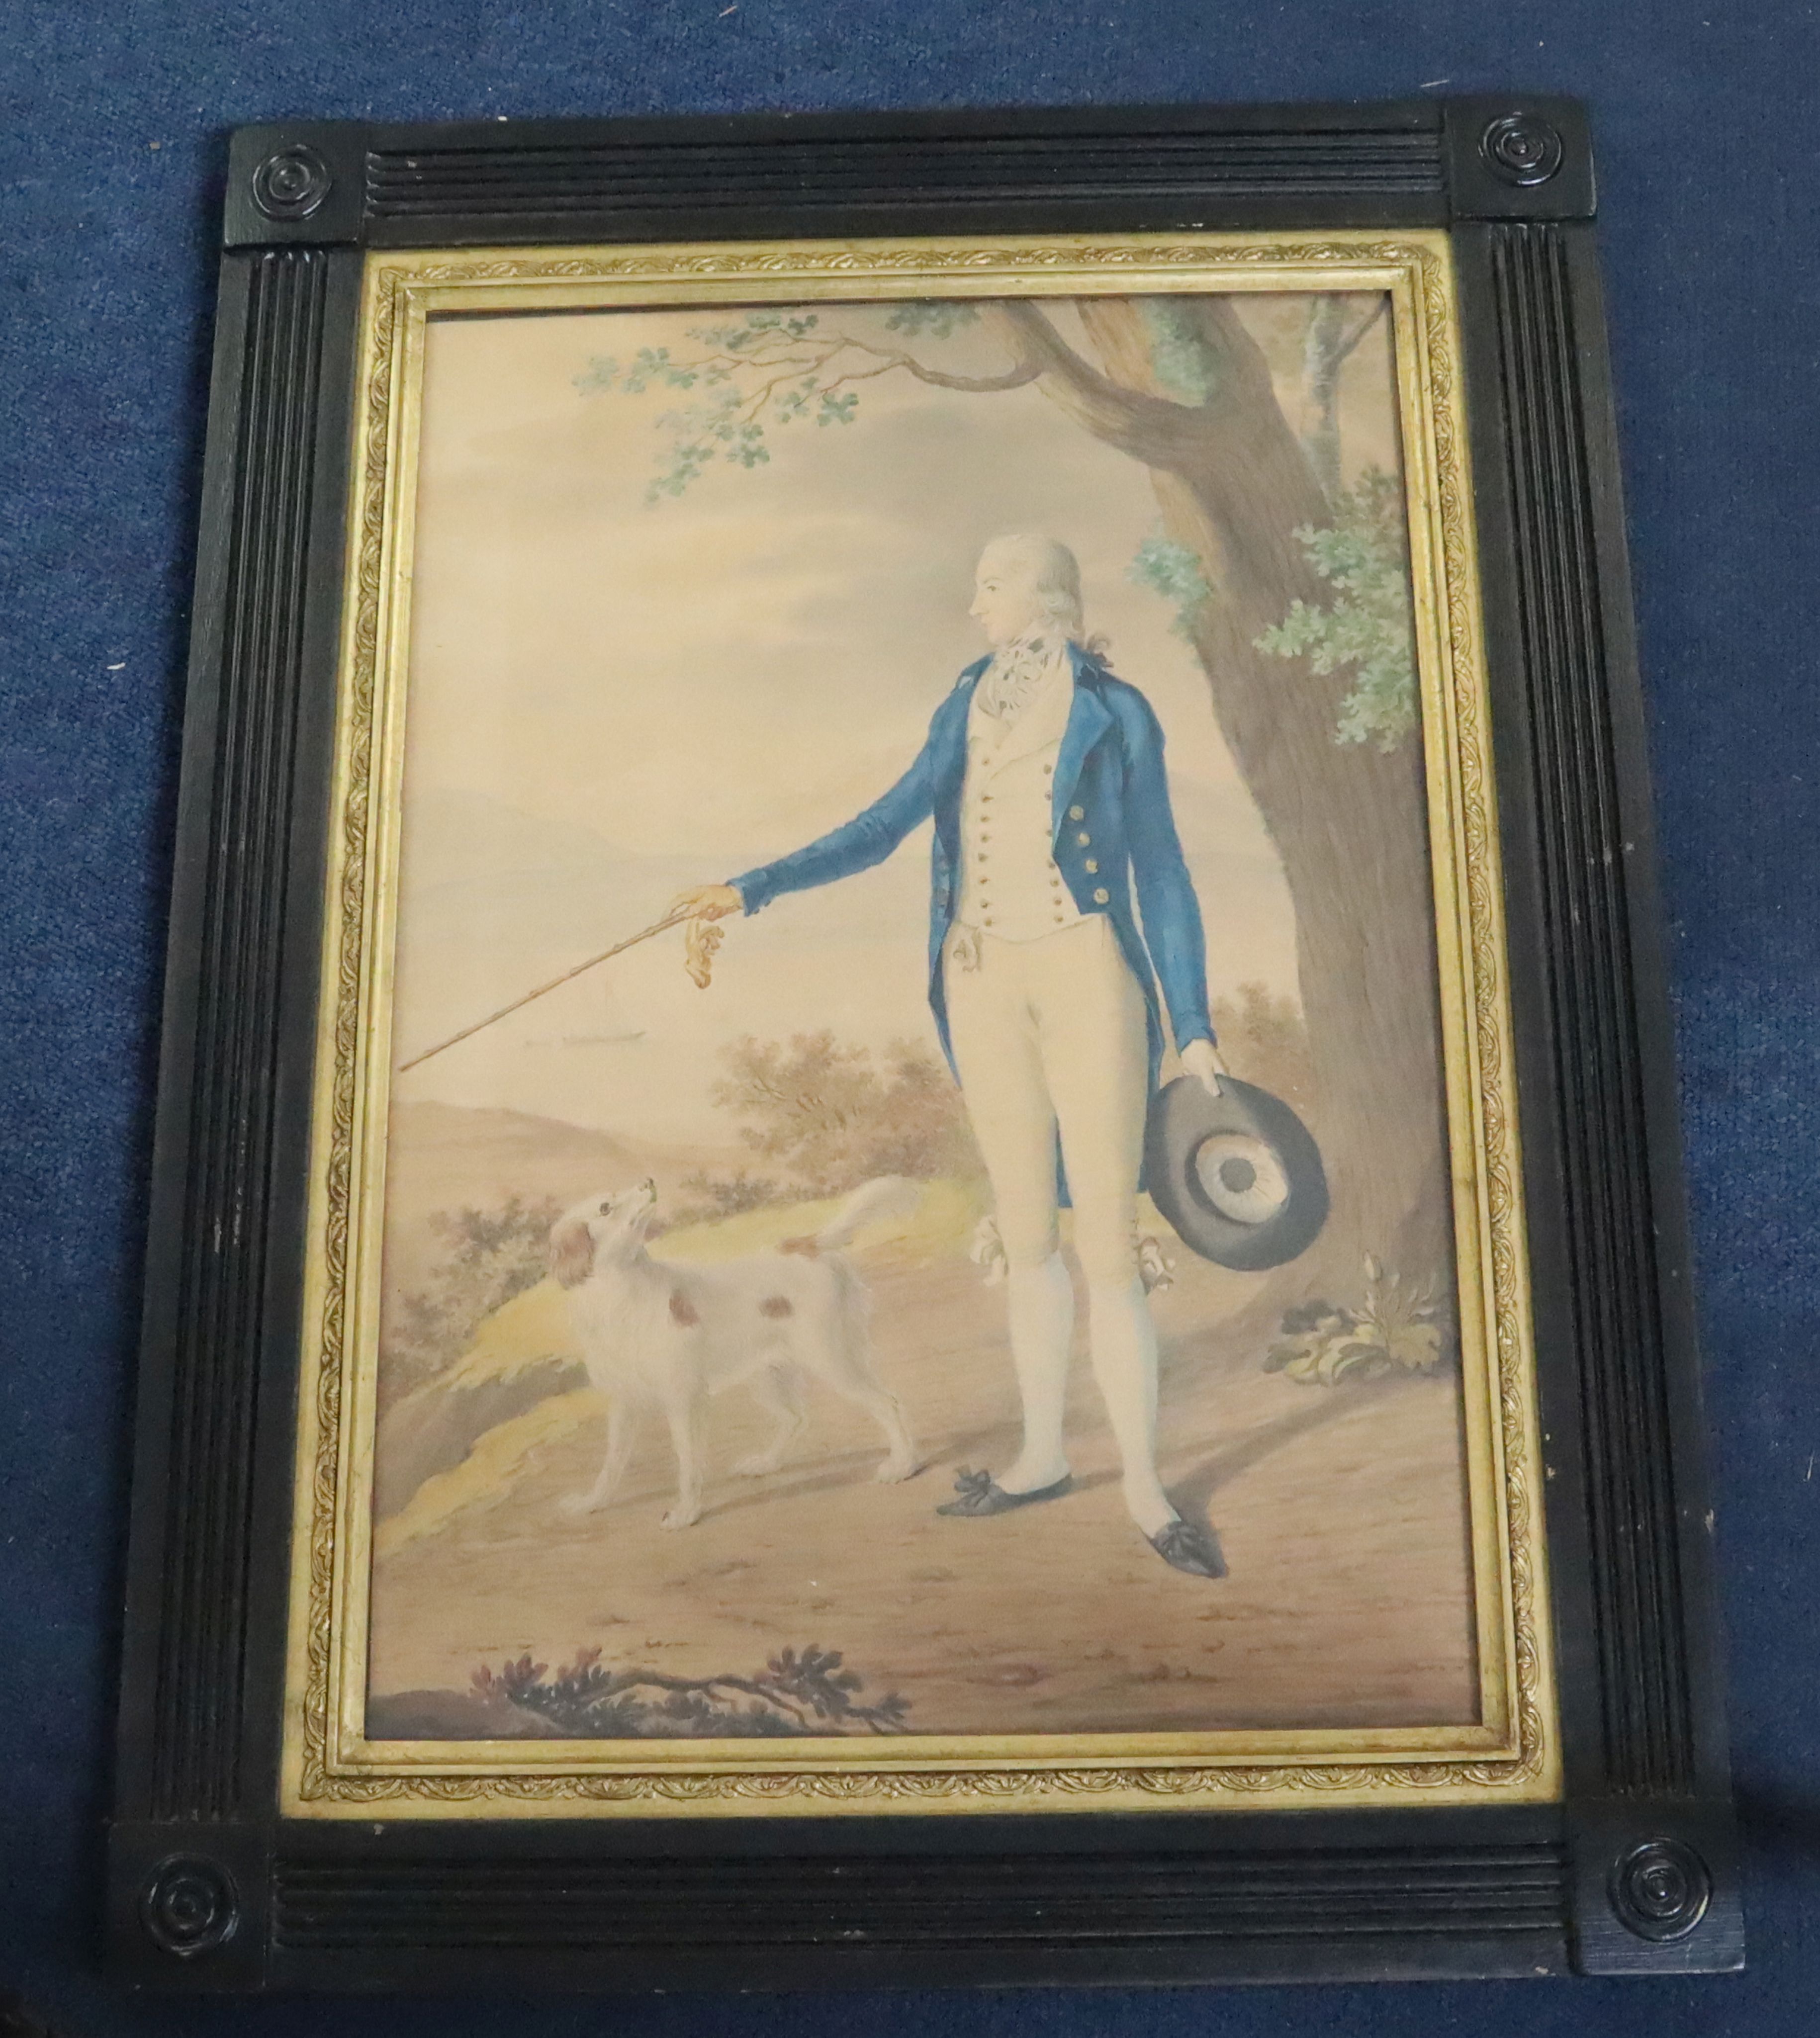 Early 19th century English SchoolwatercolourPortrait of Hugh Hammersley, standing with a dog in a - Image 2 of 3